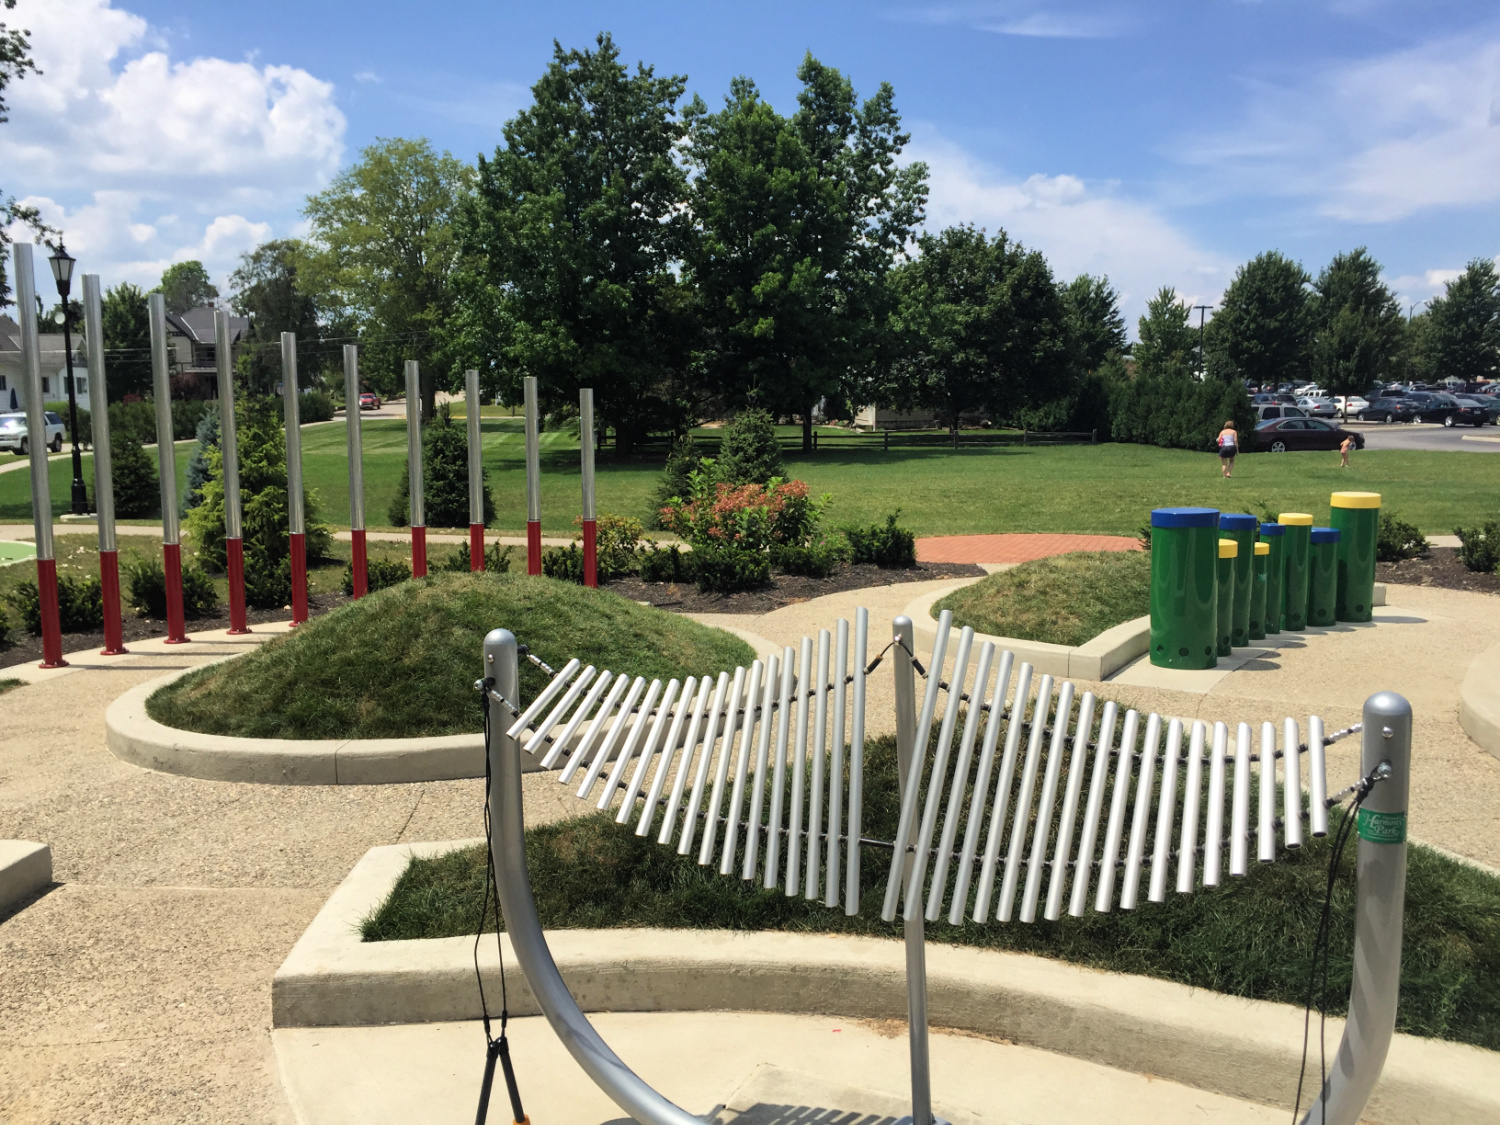 A park featuring outdoor musical instruments.